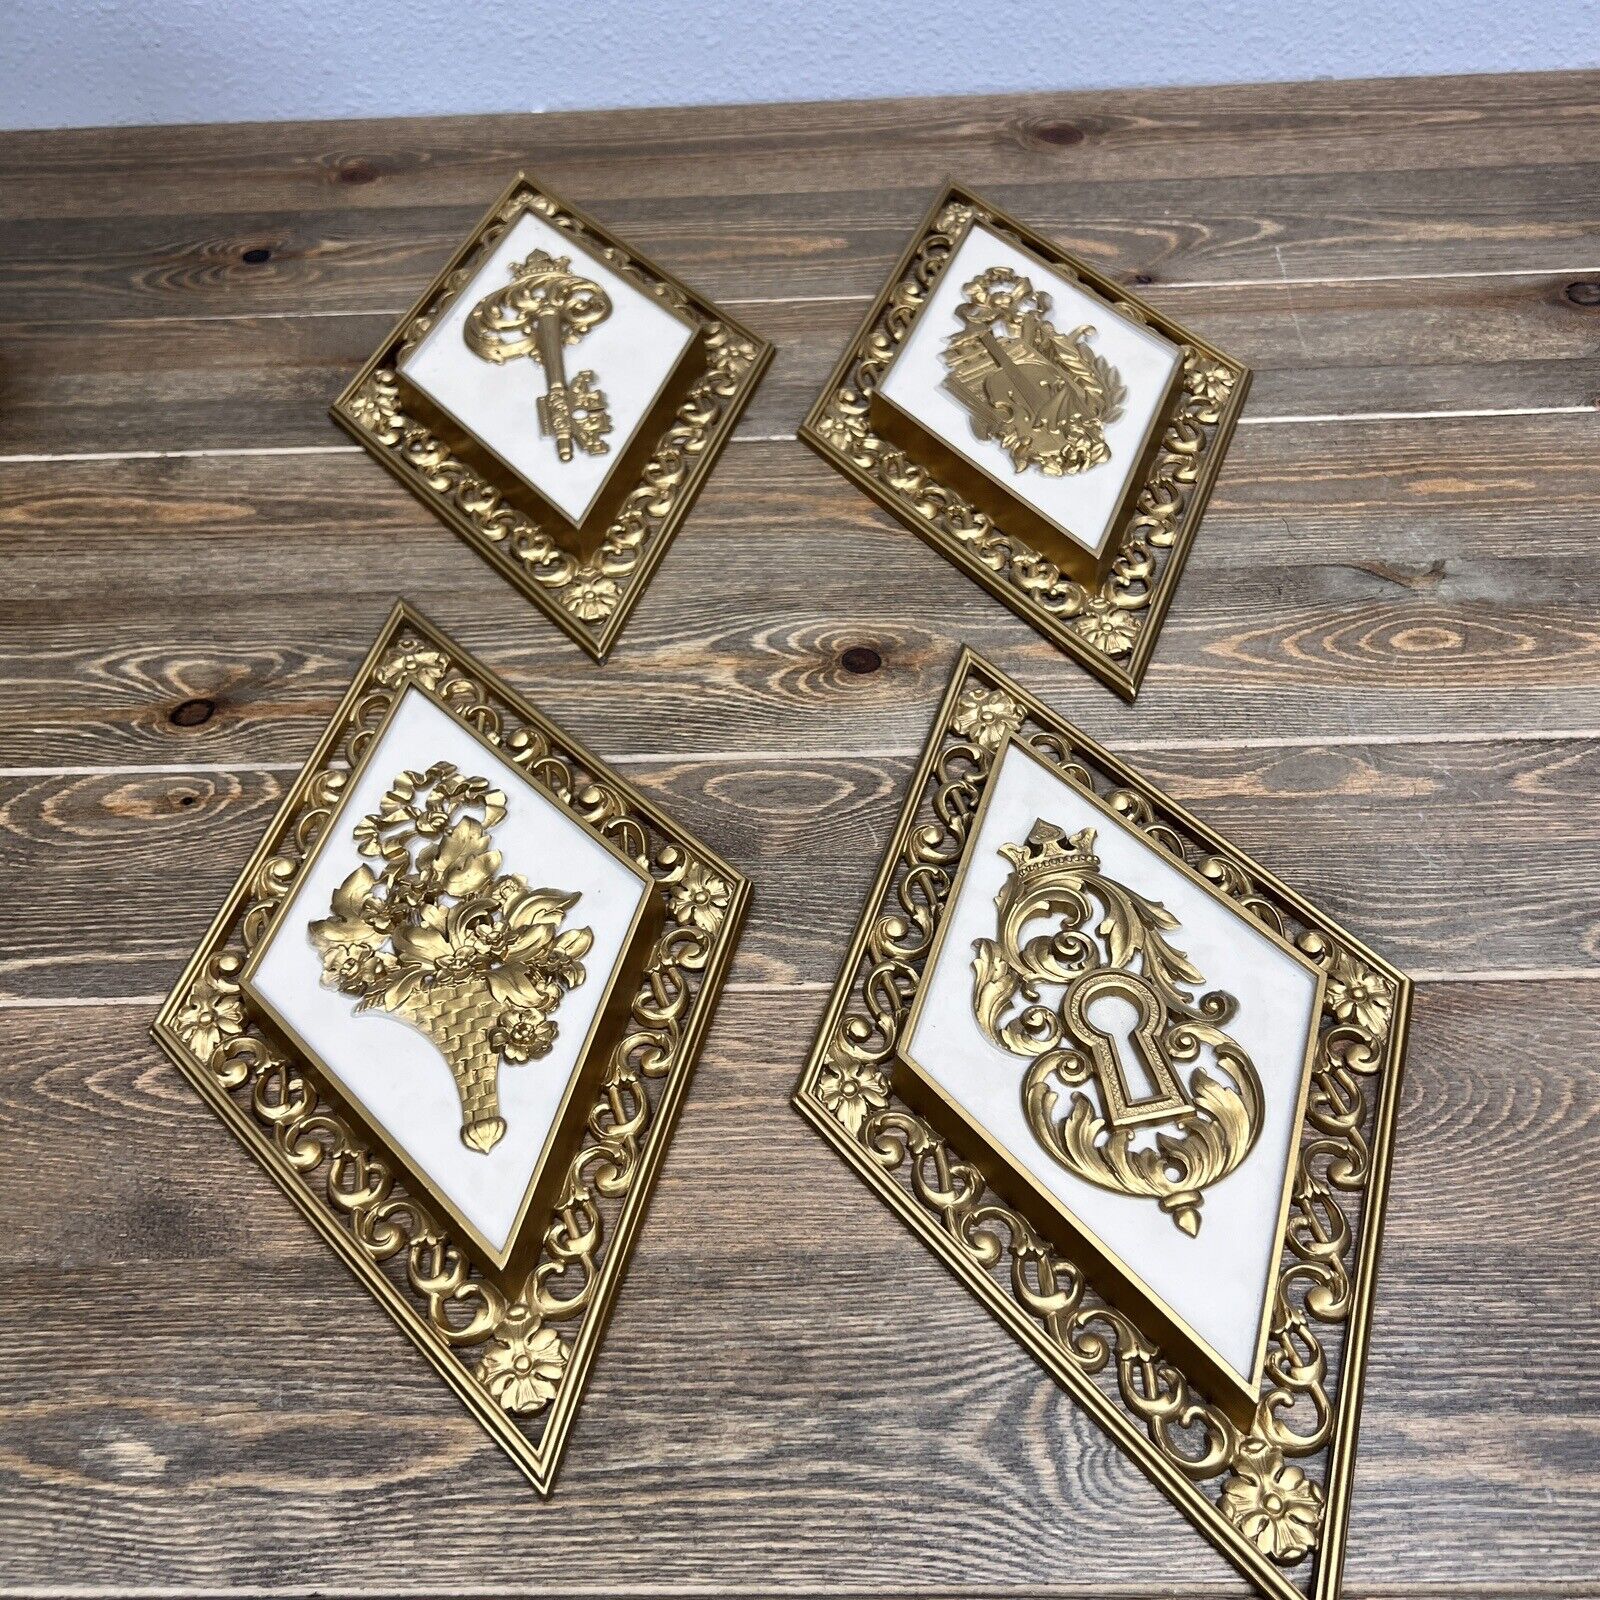 Vintage Dart Ind. Gold Diamond Shaped Wall Hangings Plaques #4271 Set of 4